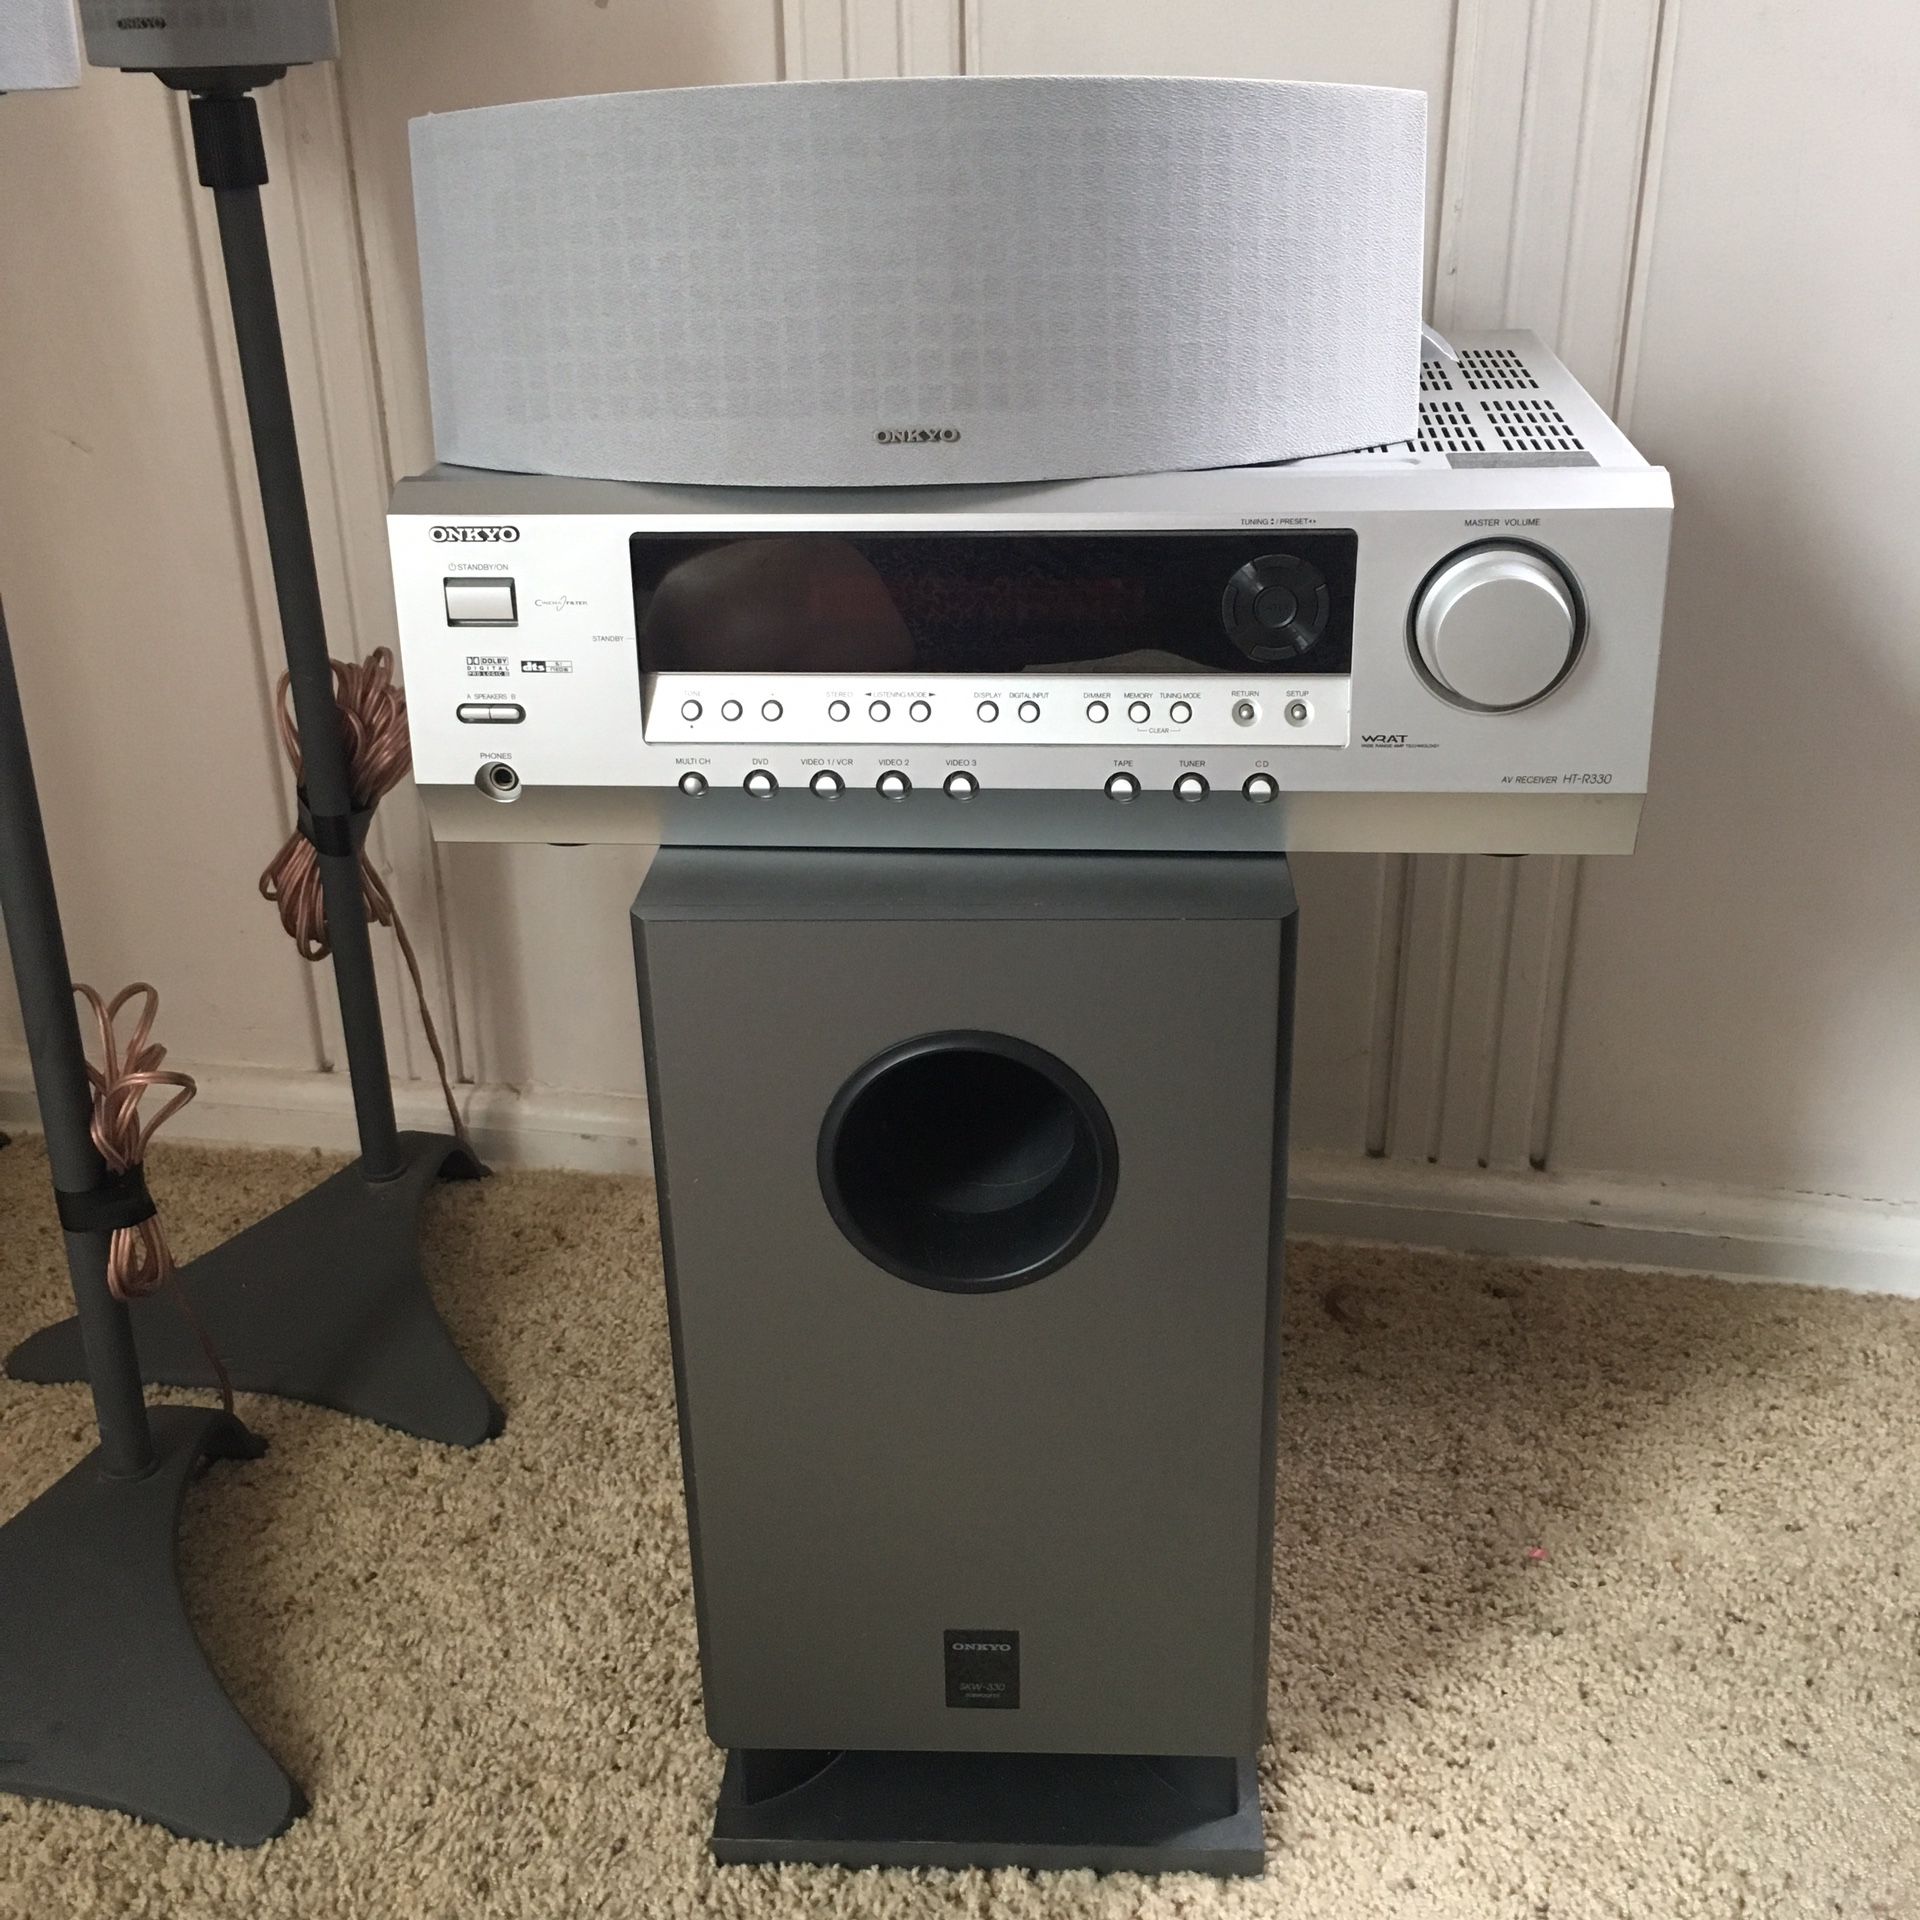 ONKYO Stereo System - Speakers - Receiver - Excellent Condition